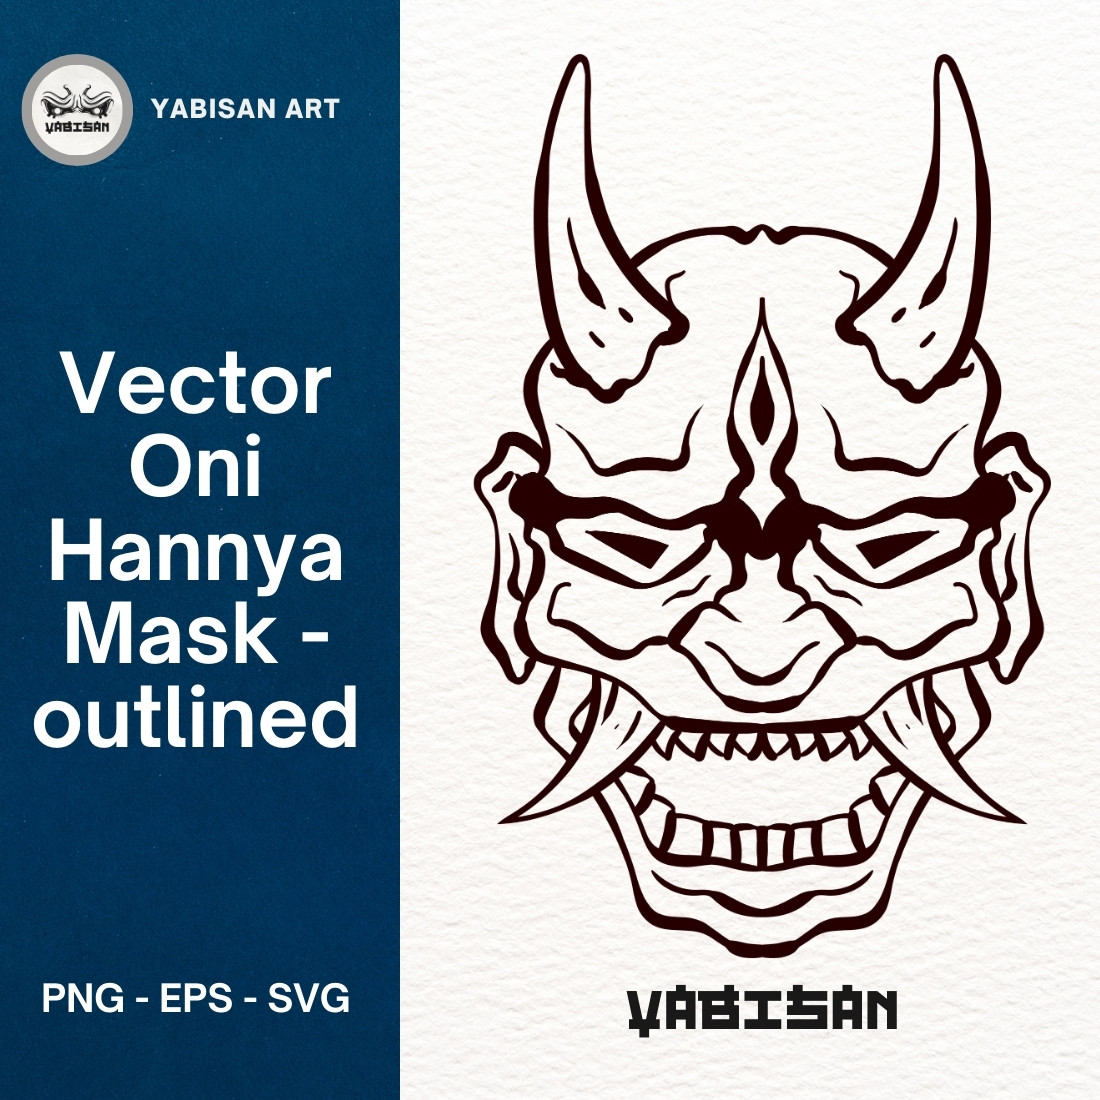 Oni Hannya Mask Art 5 – Outlined preview image.